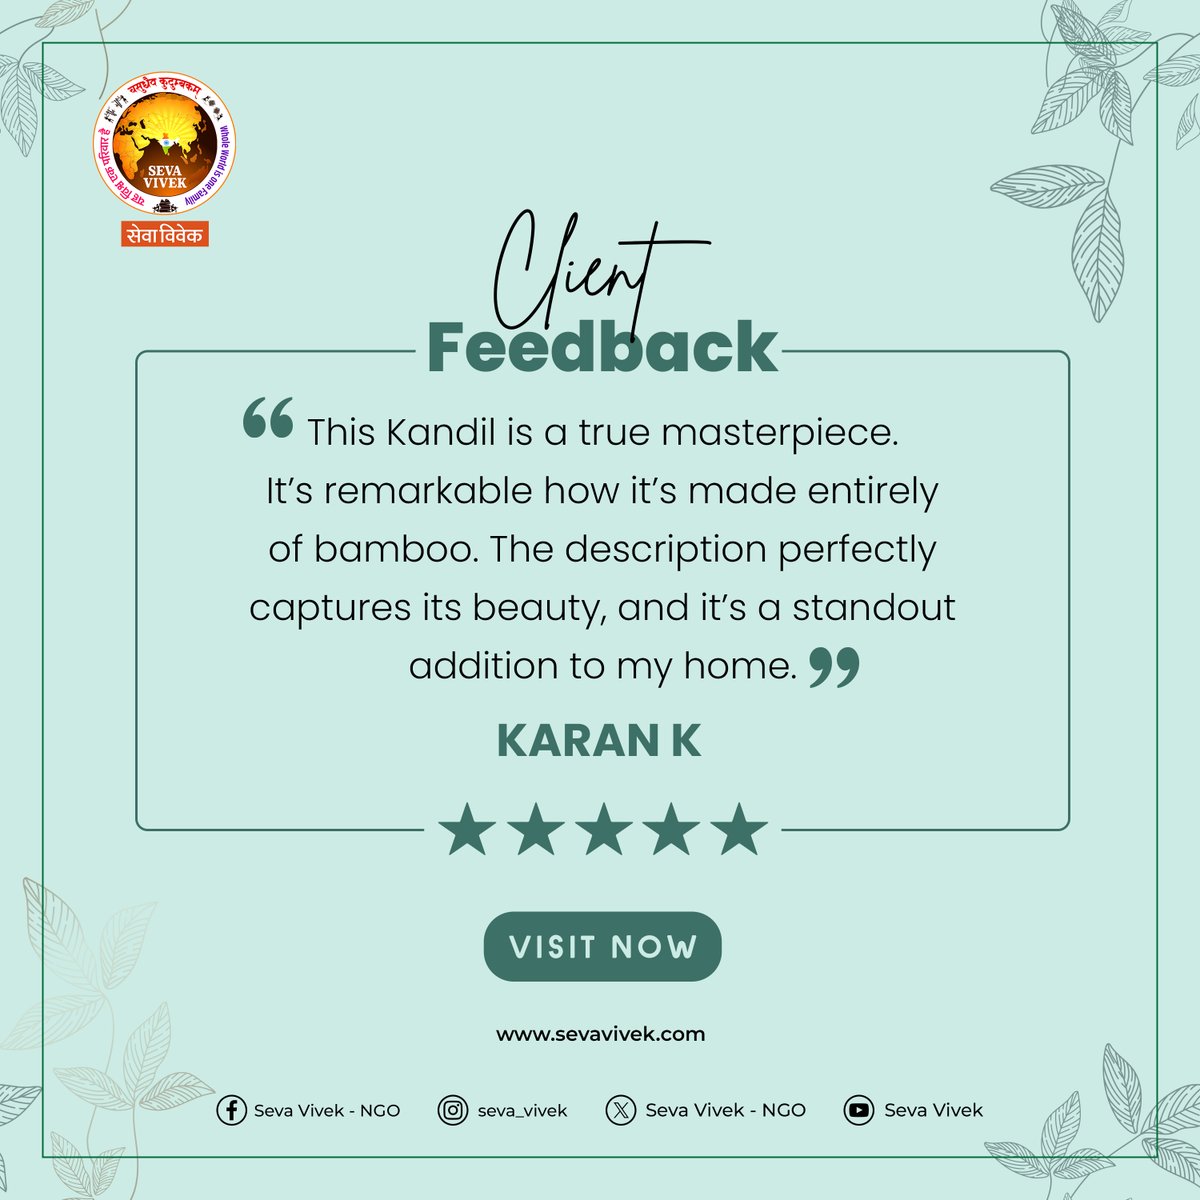 'Karan's words say it all! Our bamboo Kandil is a masterpiece, a stunning addition to any home. Discover the beauty of sustainable craftsmanship from Seva Vivek NGO. 🌟'
.
.
.
#SevaVivekNGO #BambooMasterpiece #EcoFriendlyDecor #SustainableArt #HappyCustomer #HomeDecor